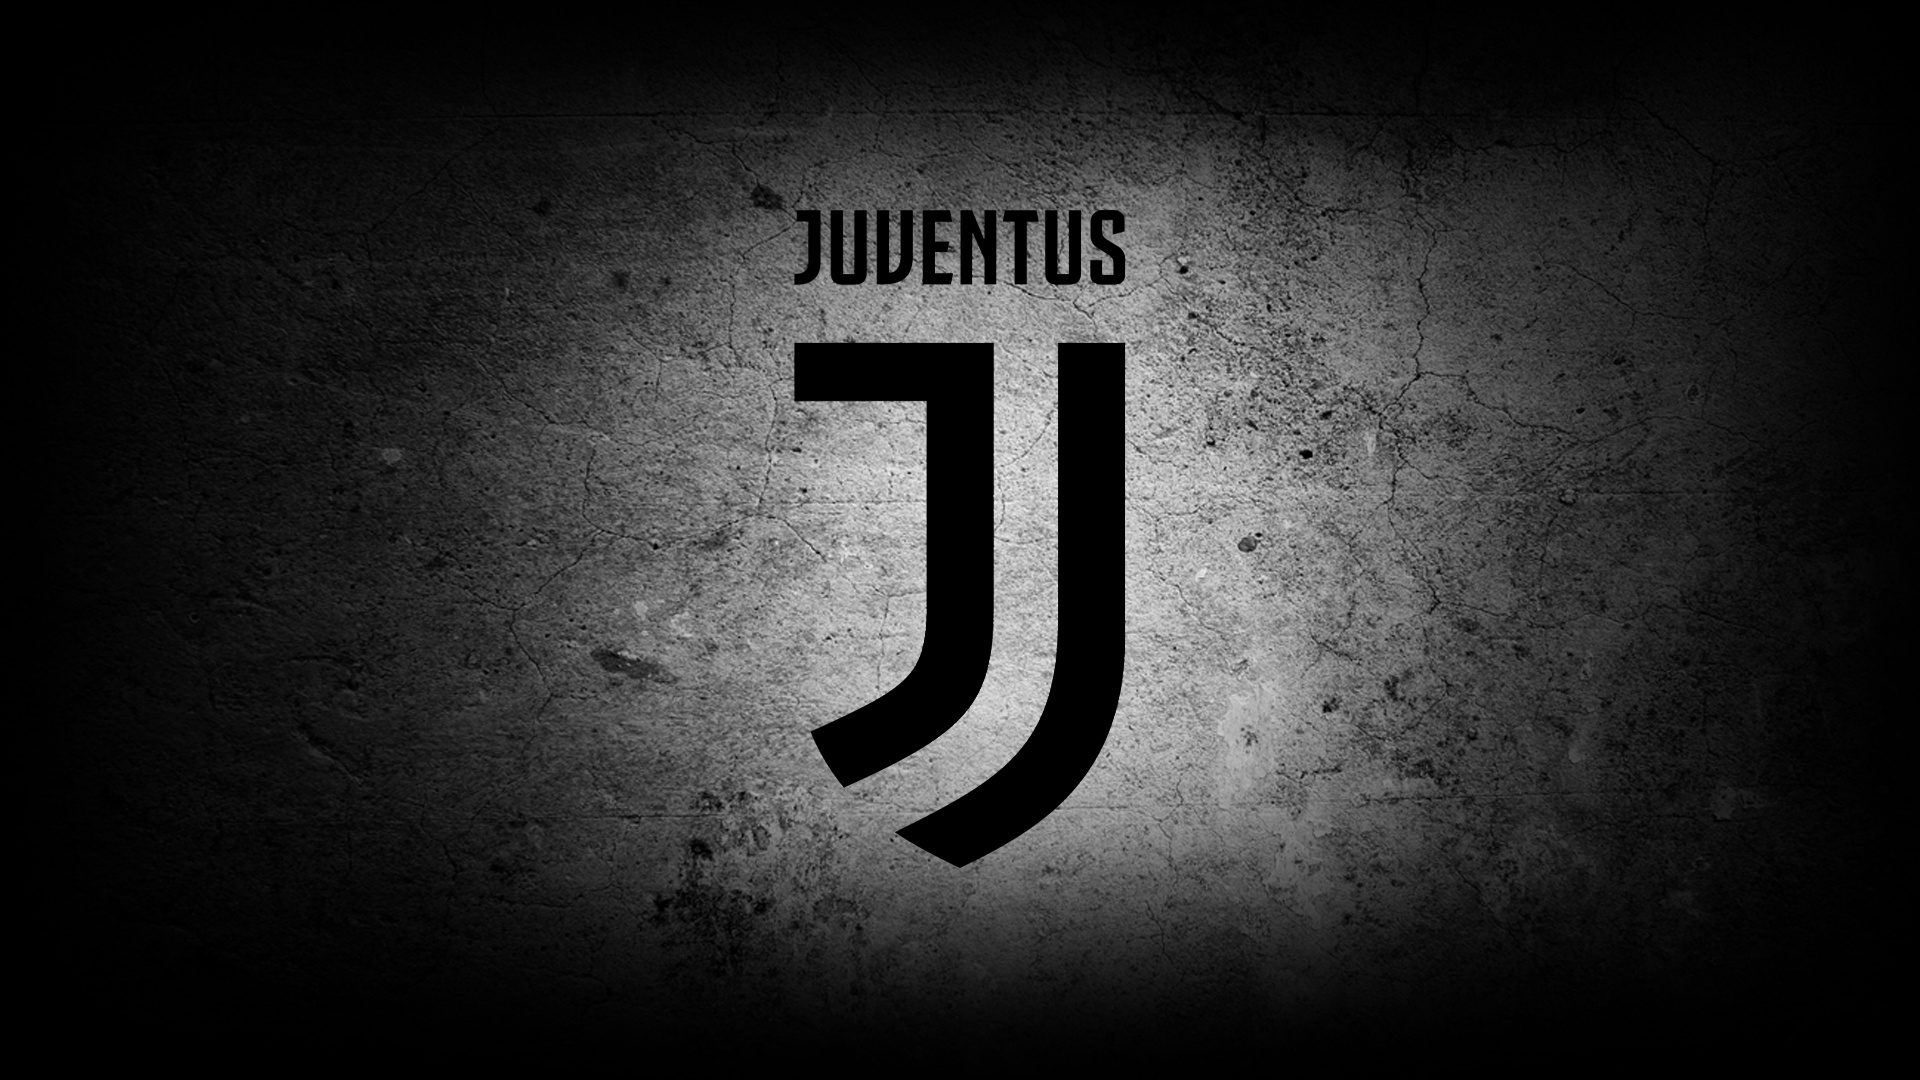 Juventus: The club has won 51 official trophies, more than any other team in the country. 1920x1080 Full HD Background.